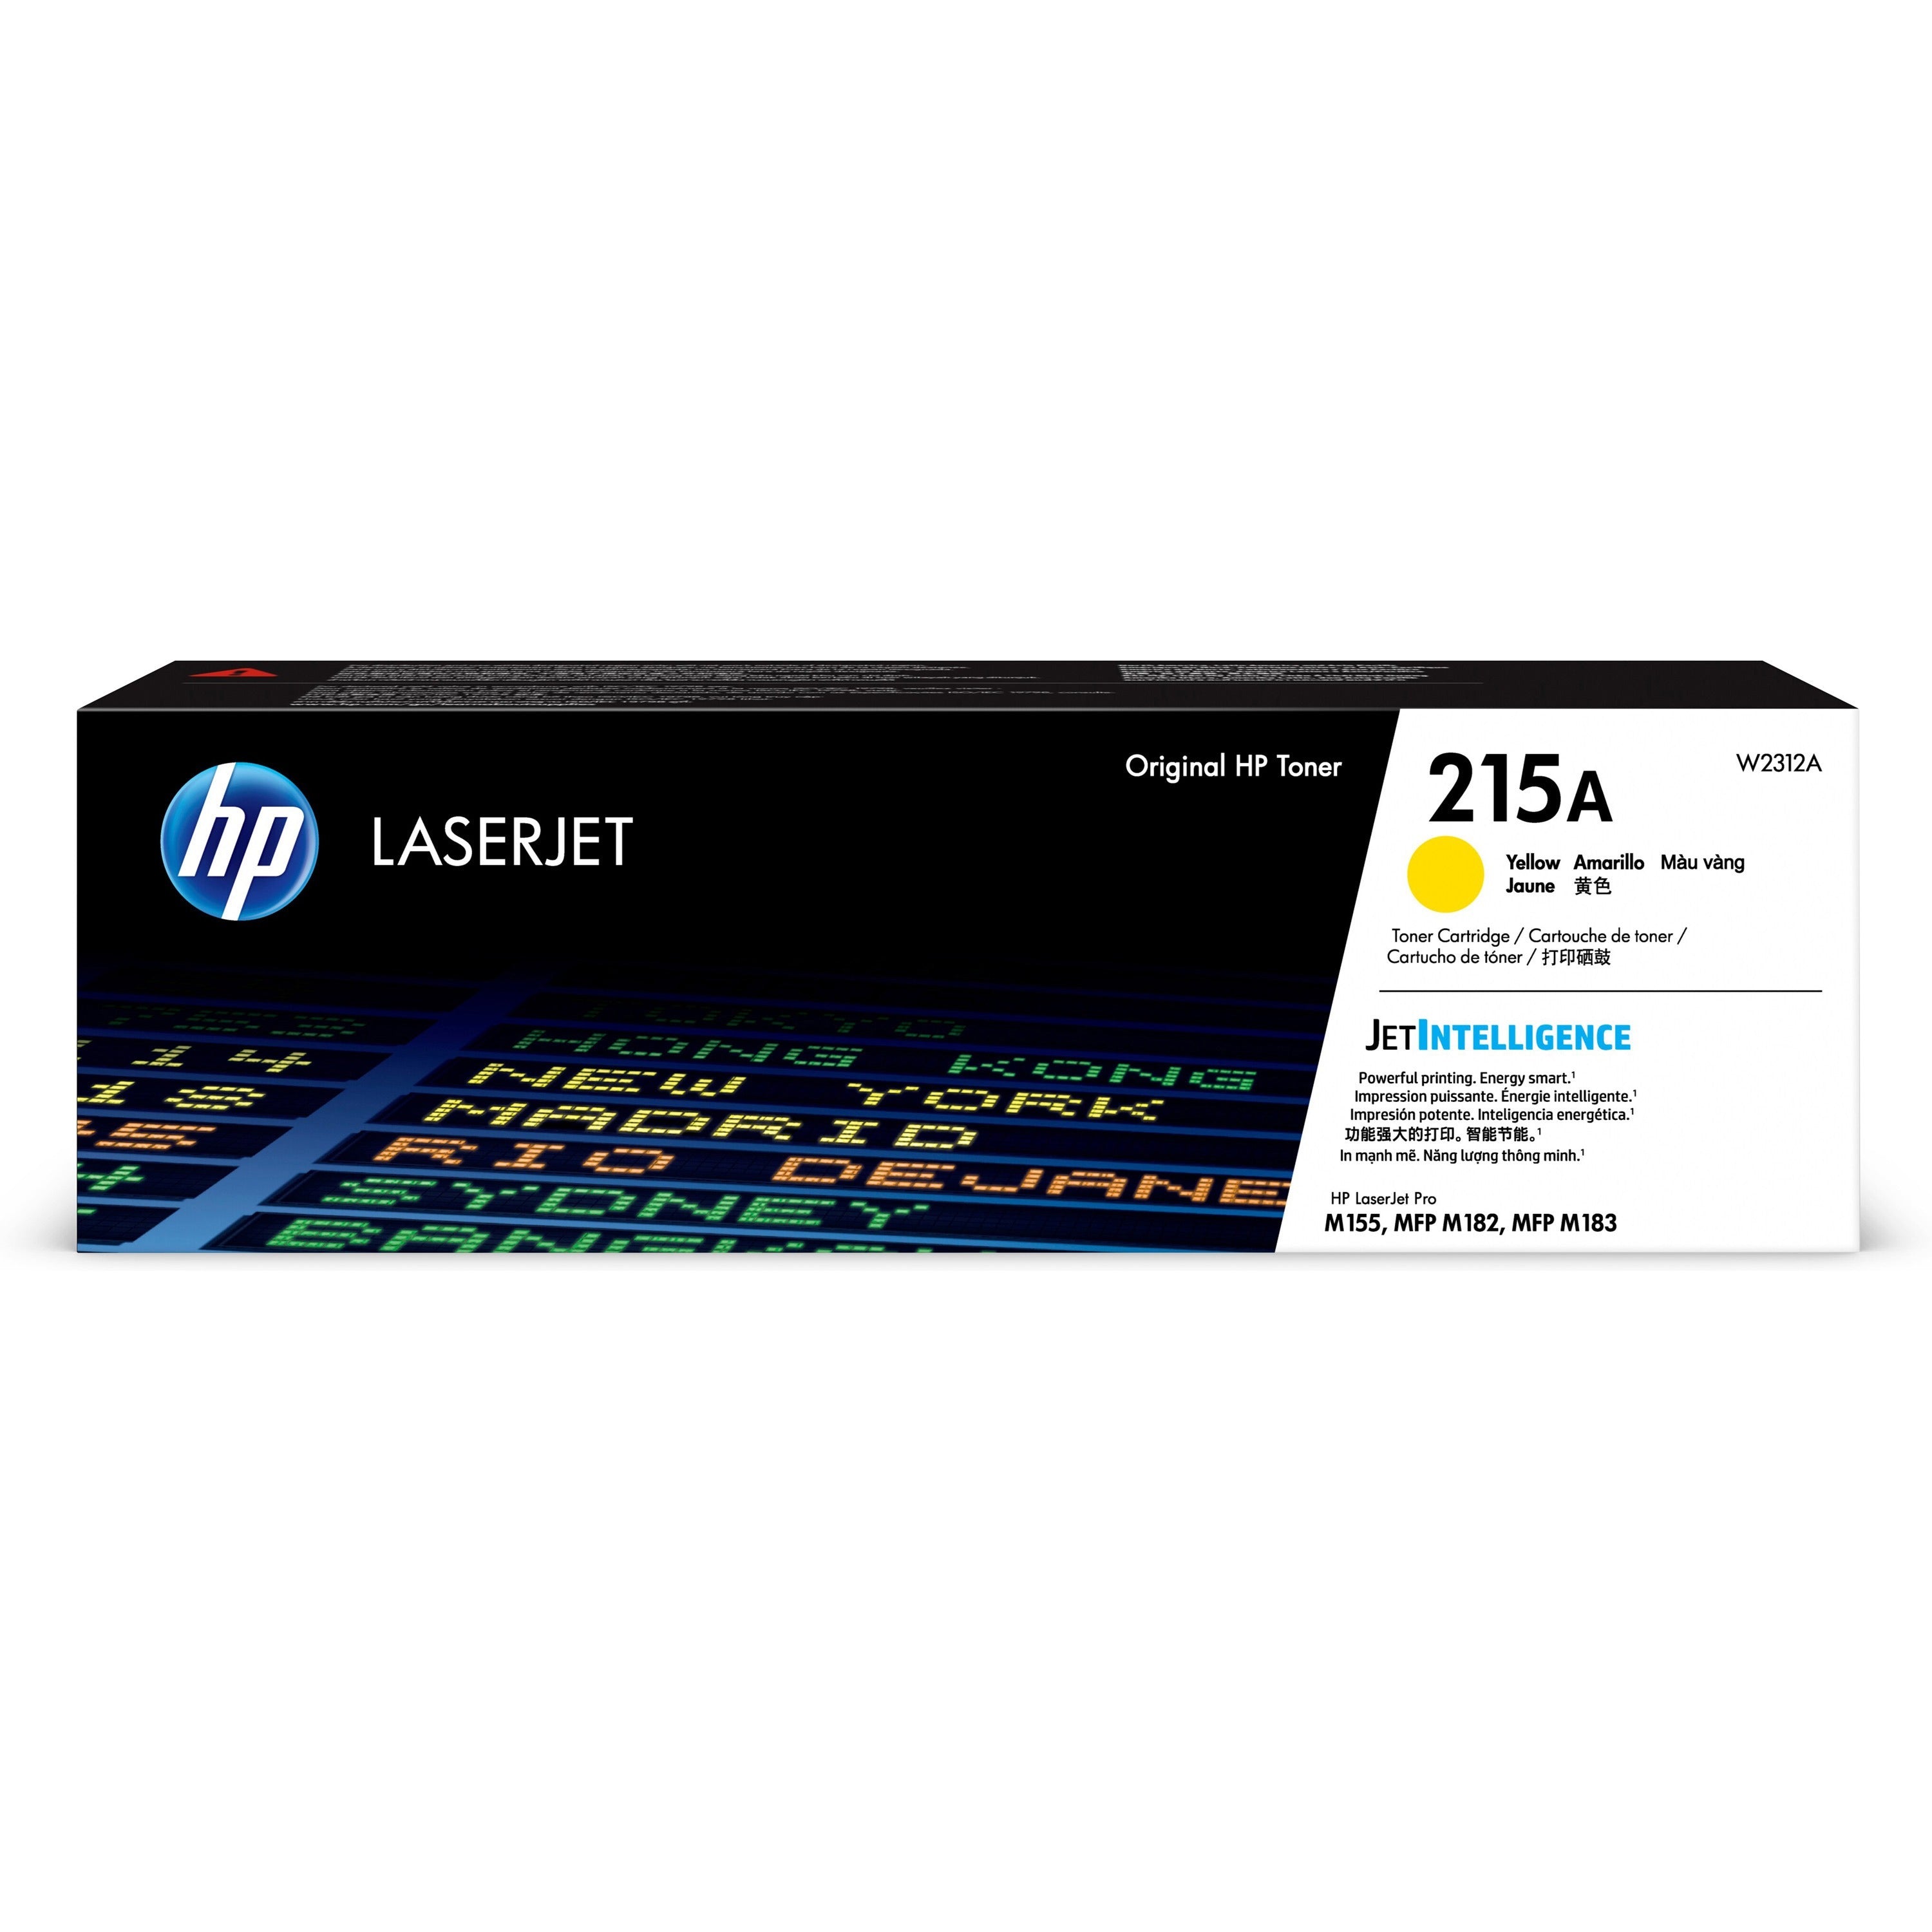 hp-215a-original-laser-toner-cartridge-yellow-1-each-850-pages_heww2312a - 1